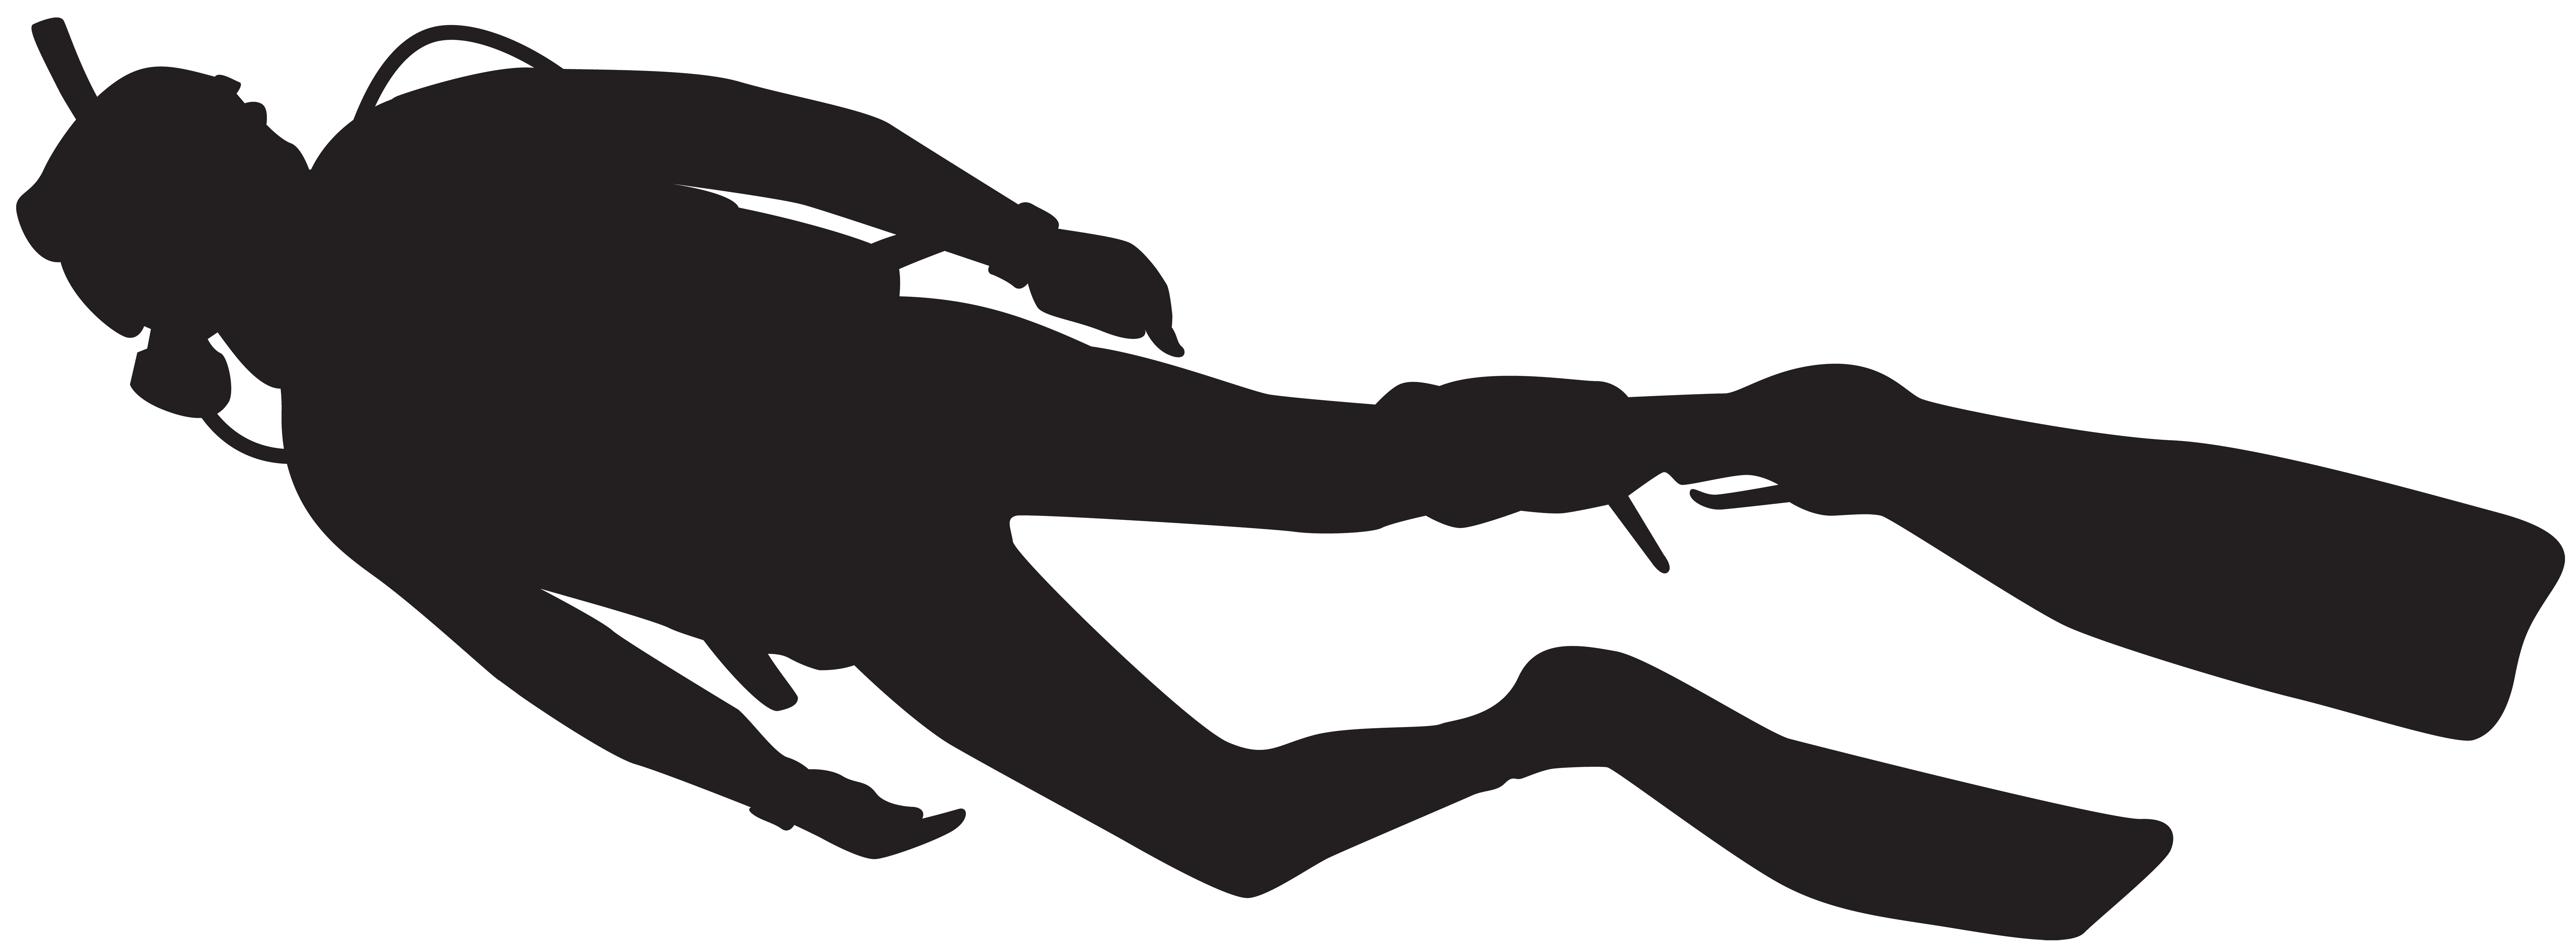 Diver silhouette png.